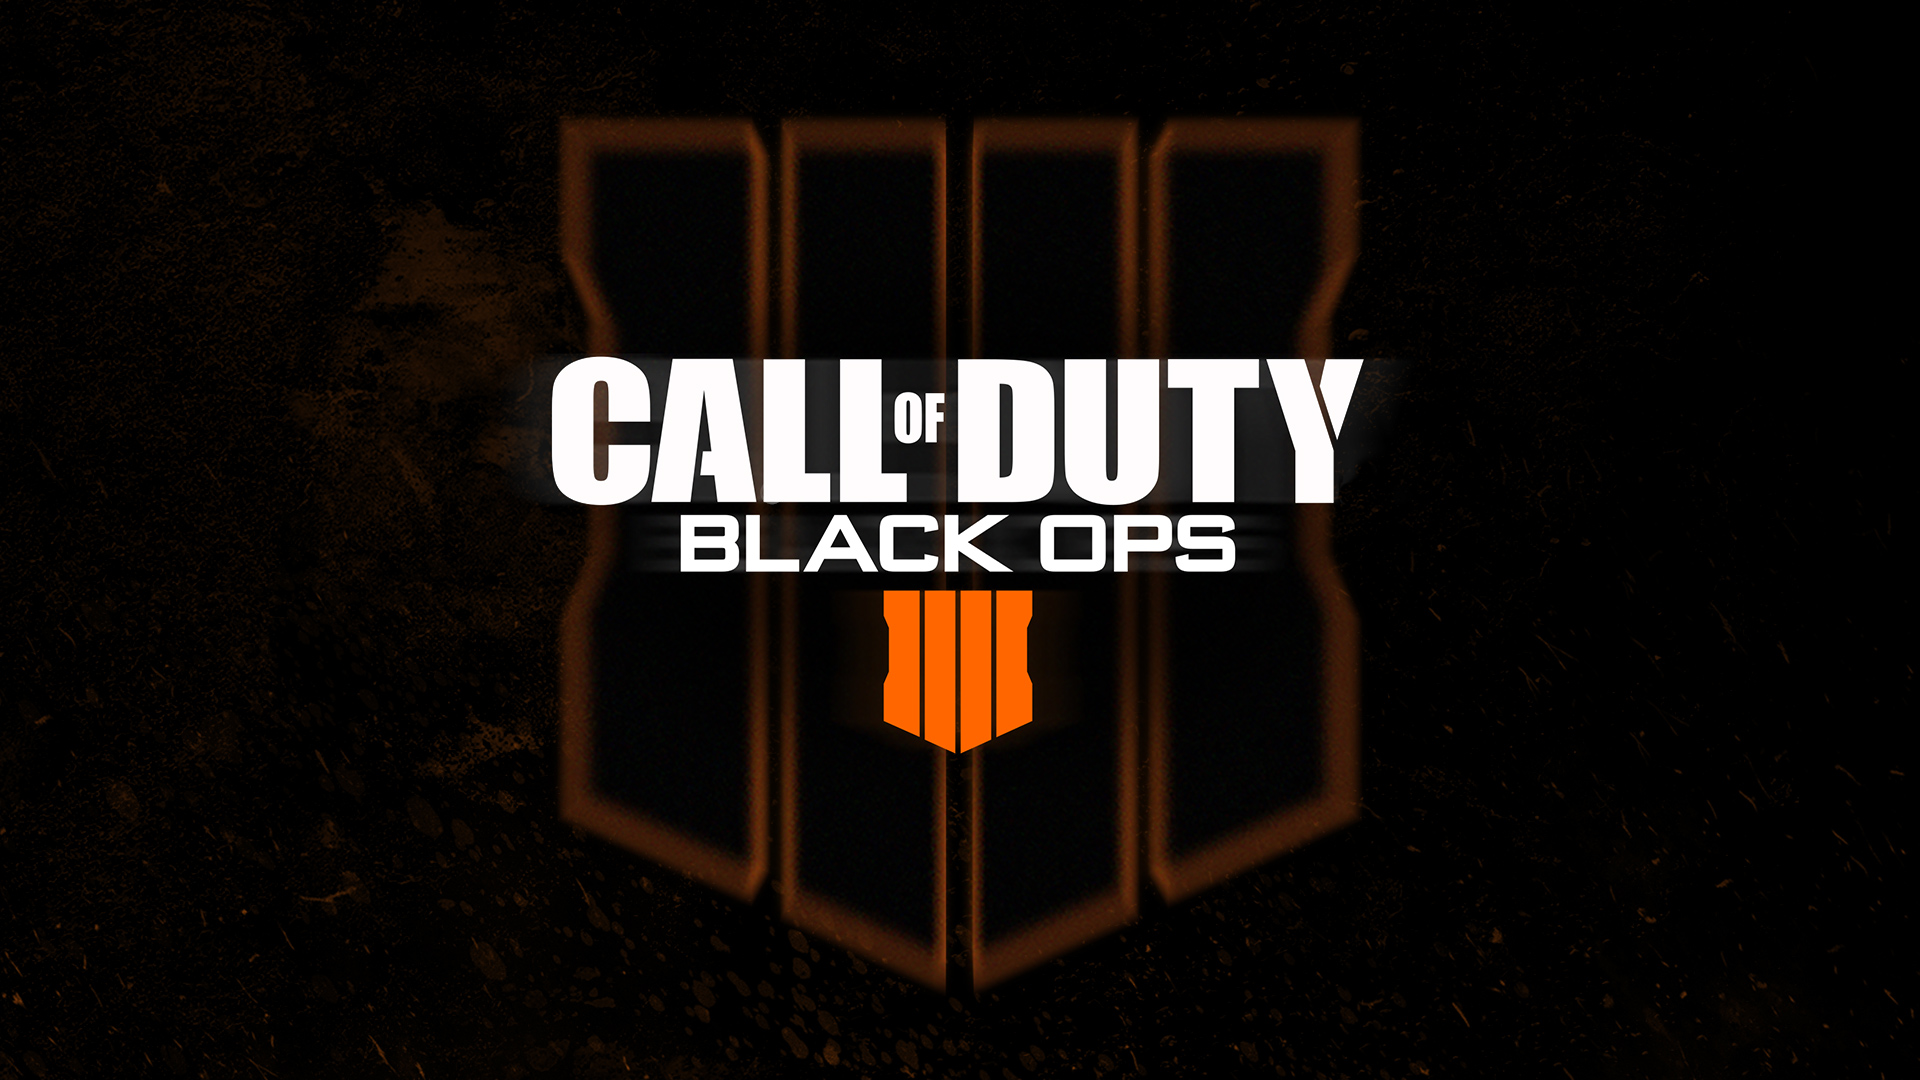 Call Of Duty Black Ops 4, HD Games, 4k Wallpapers, Images, Backgrounds